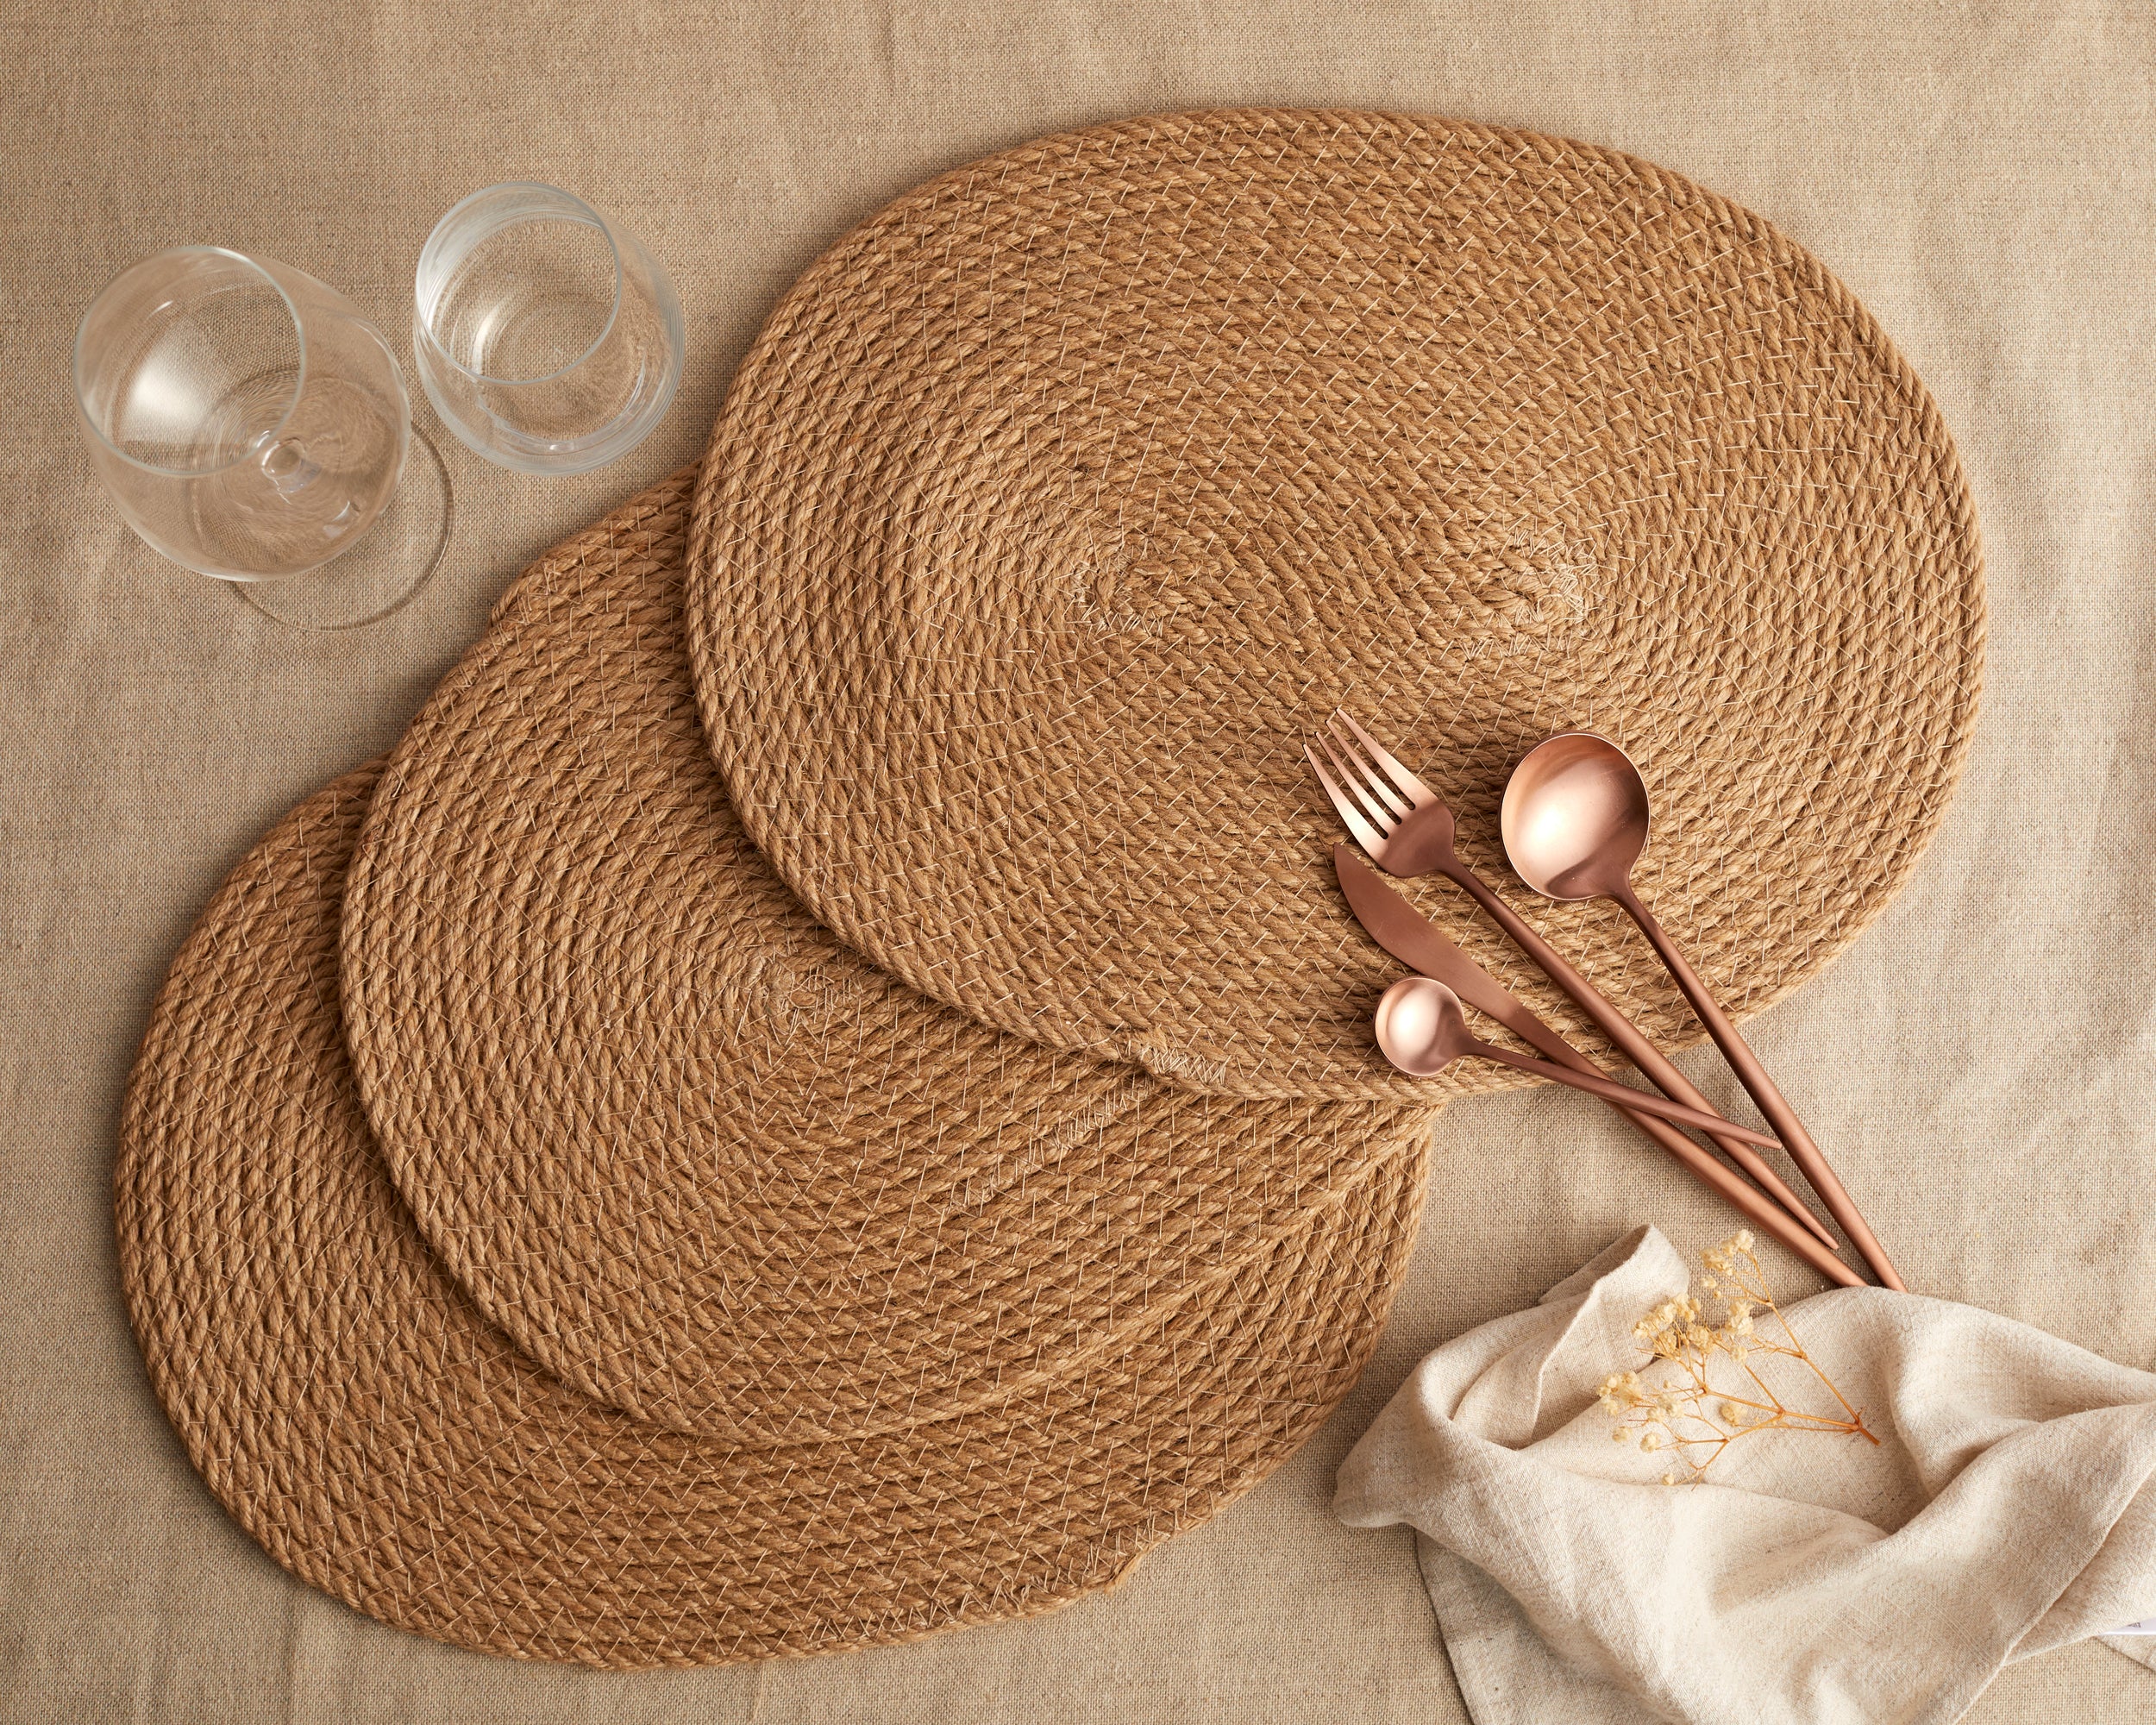 What a Host Home: Oval Shape Jute Placemat set